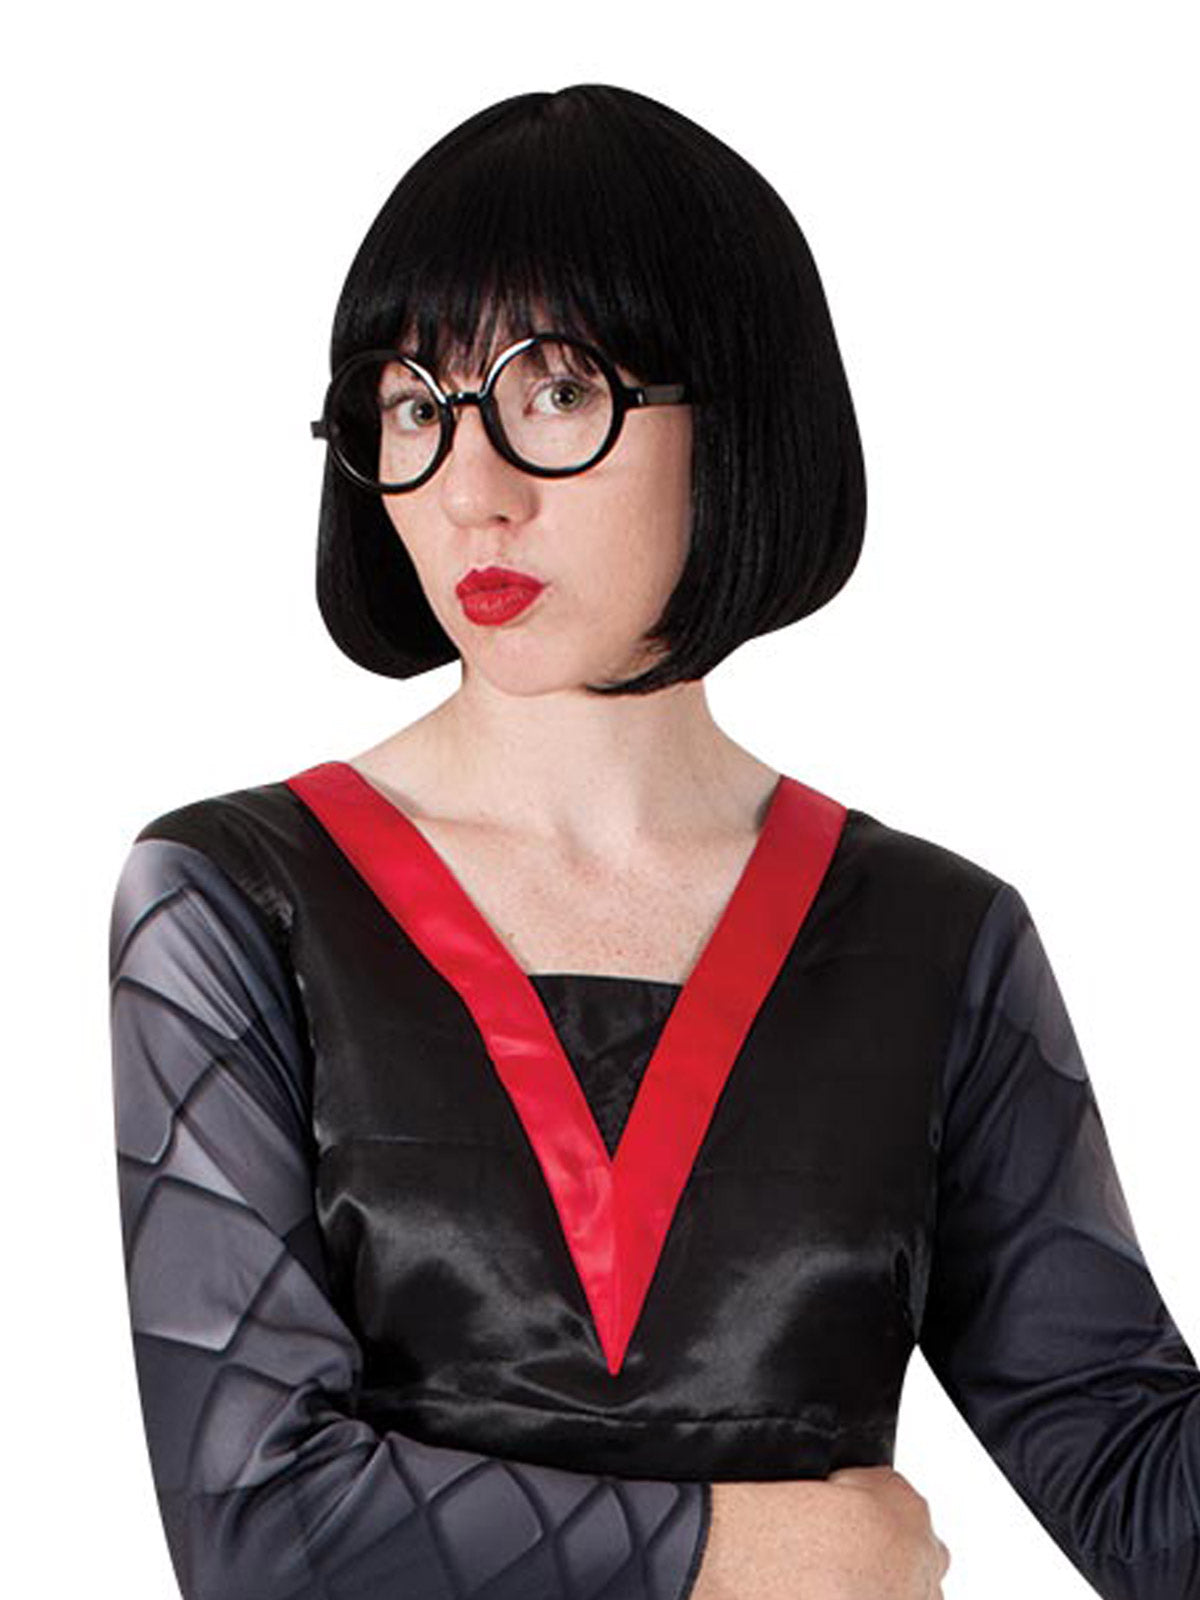 Edna Mode Deluxe Adult Costume and Wig Set Incredibles Licensed